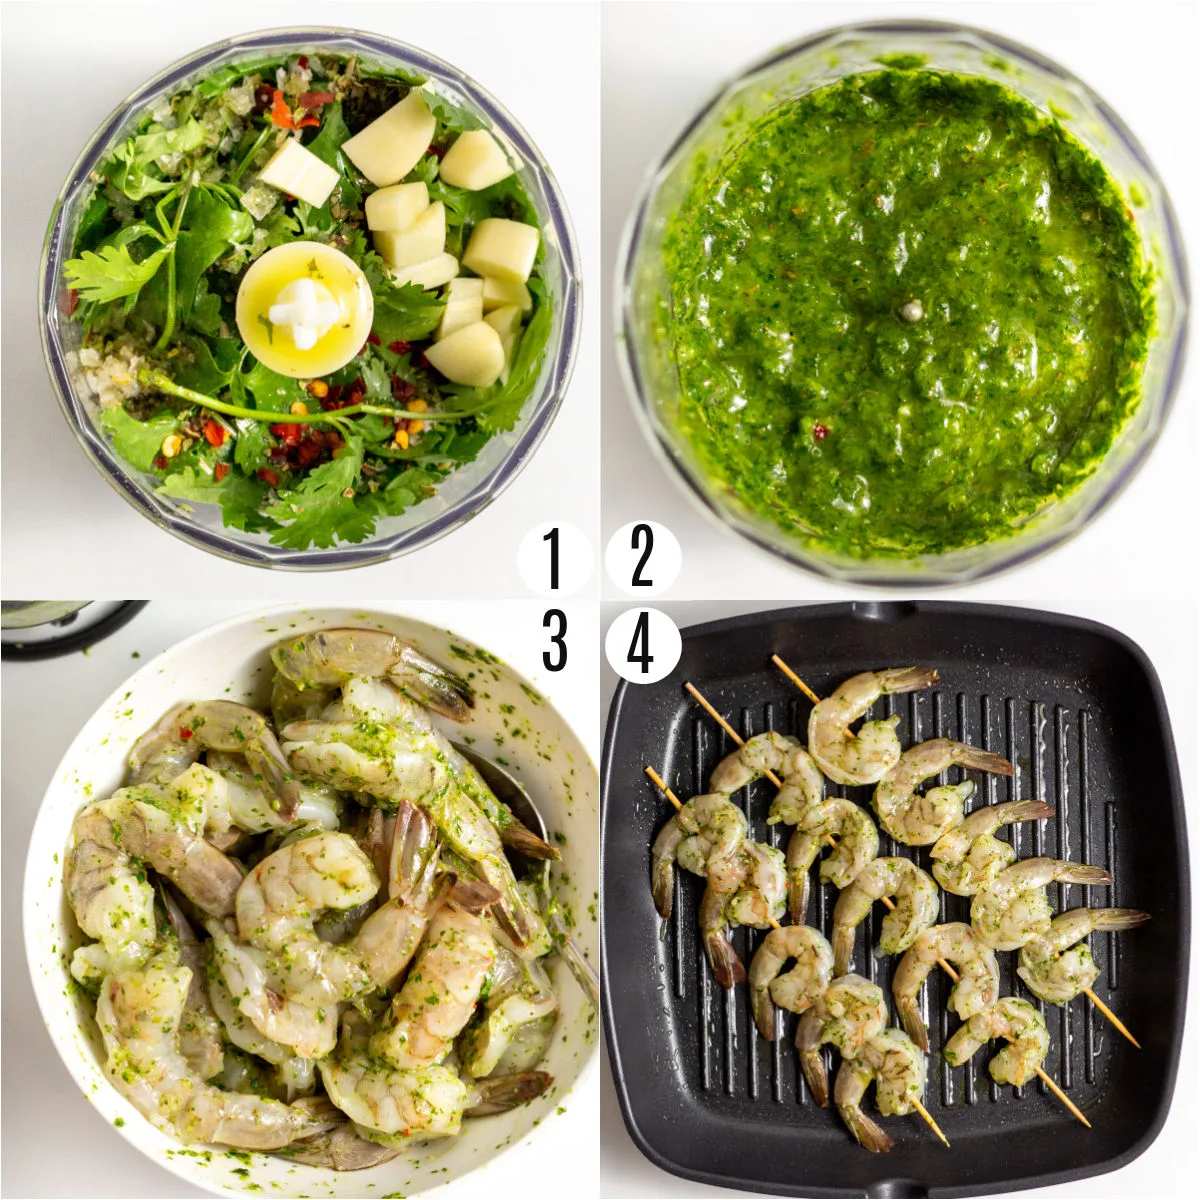 Step by step photos showing how to make chimichurri grilled shrimp.